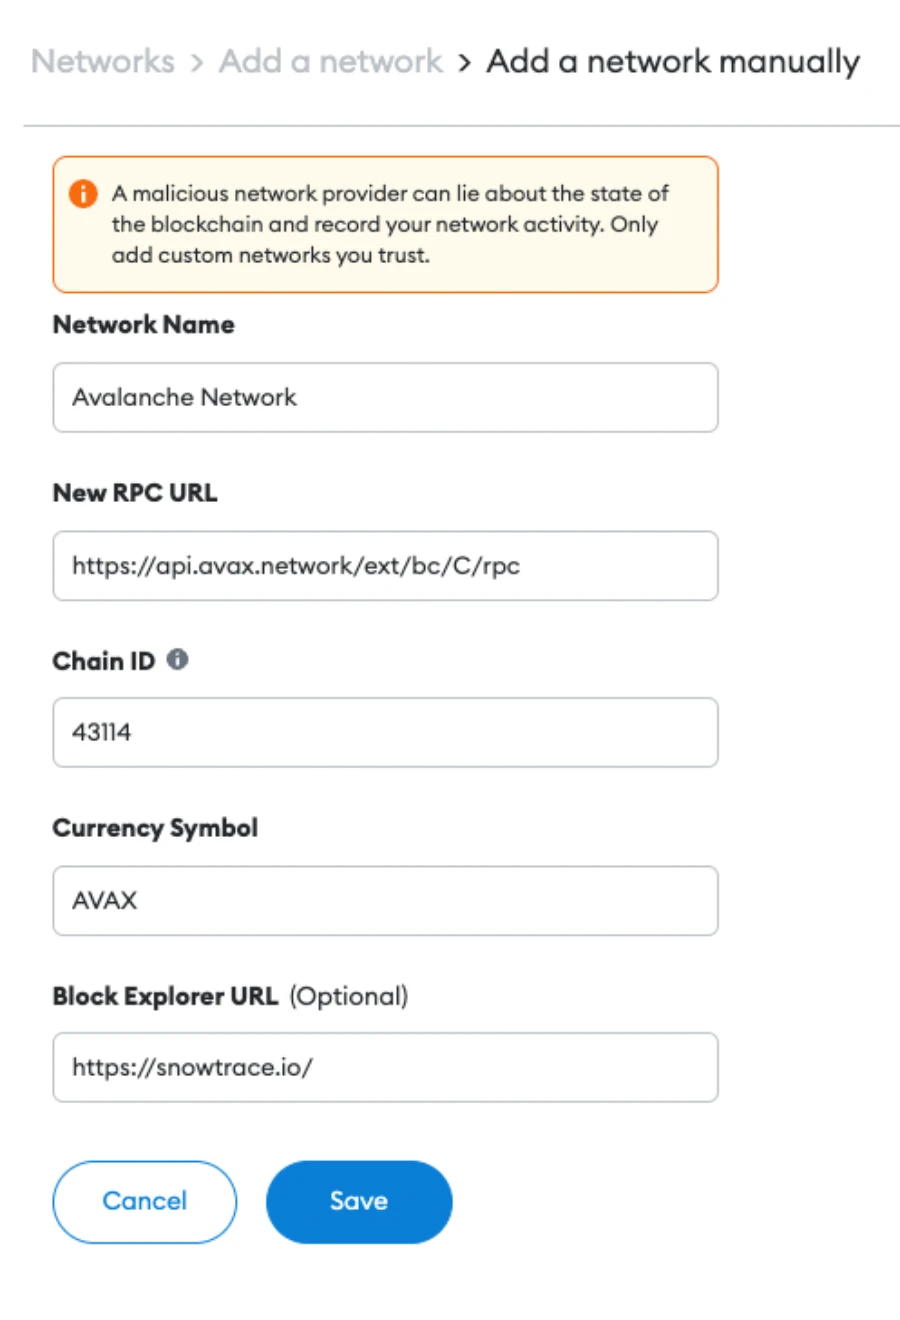 Step 1: Connect to the Avalanche Network